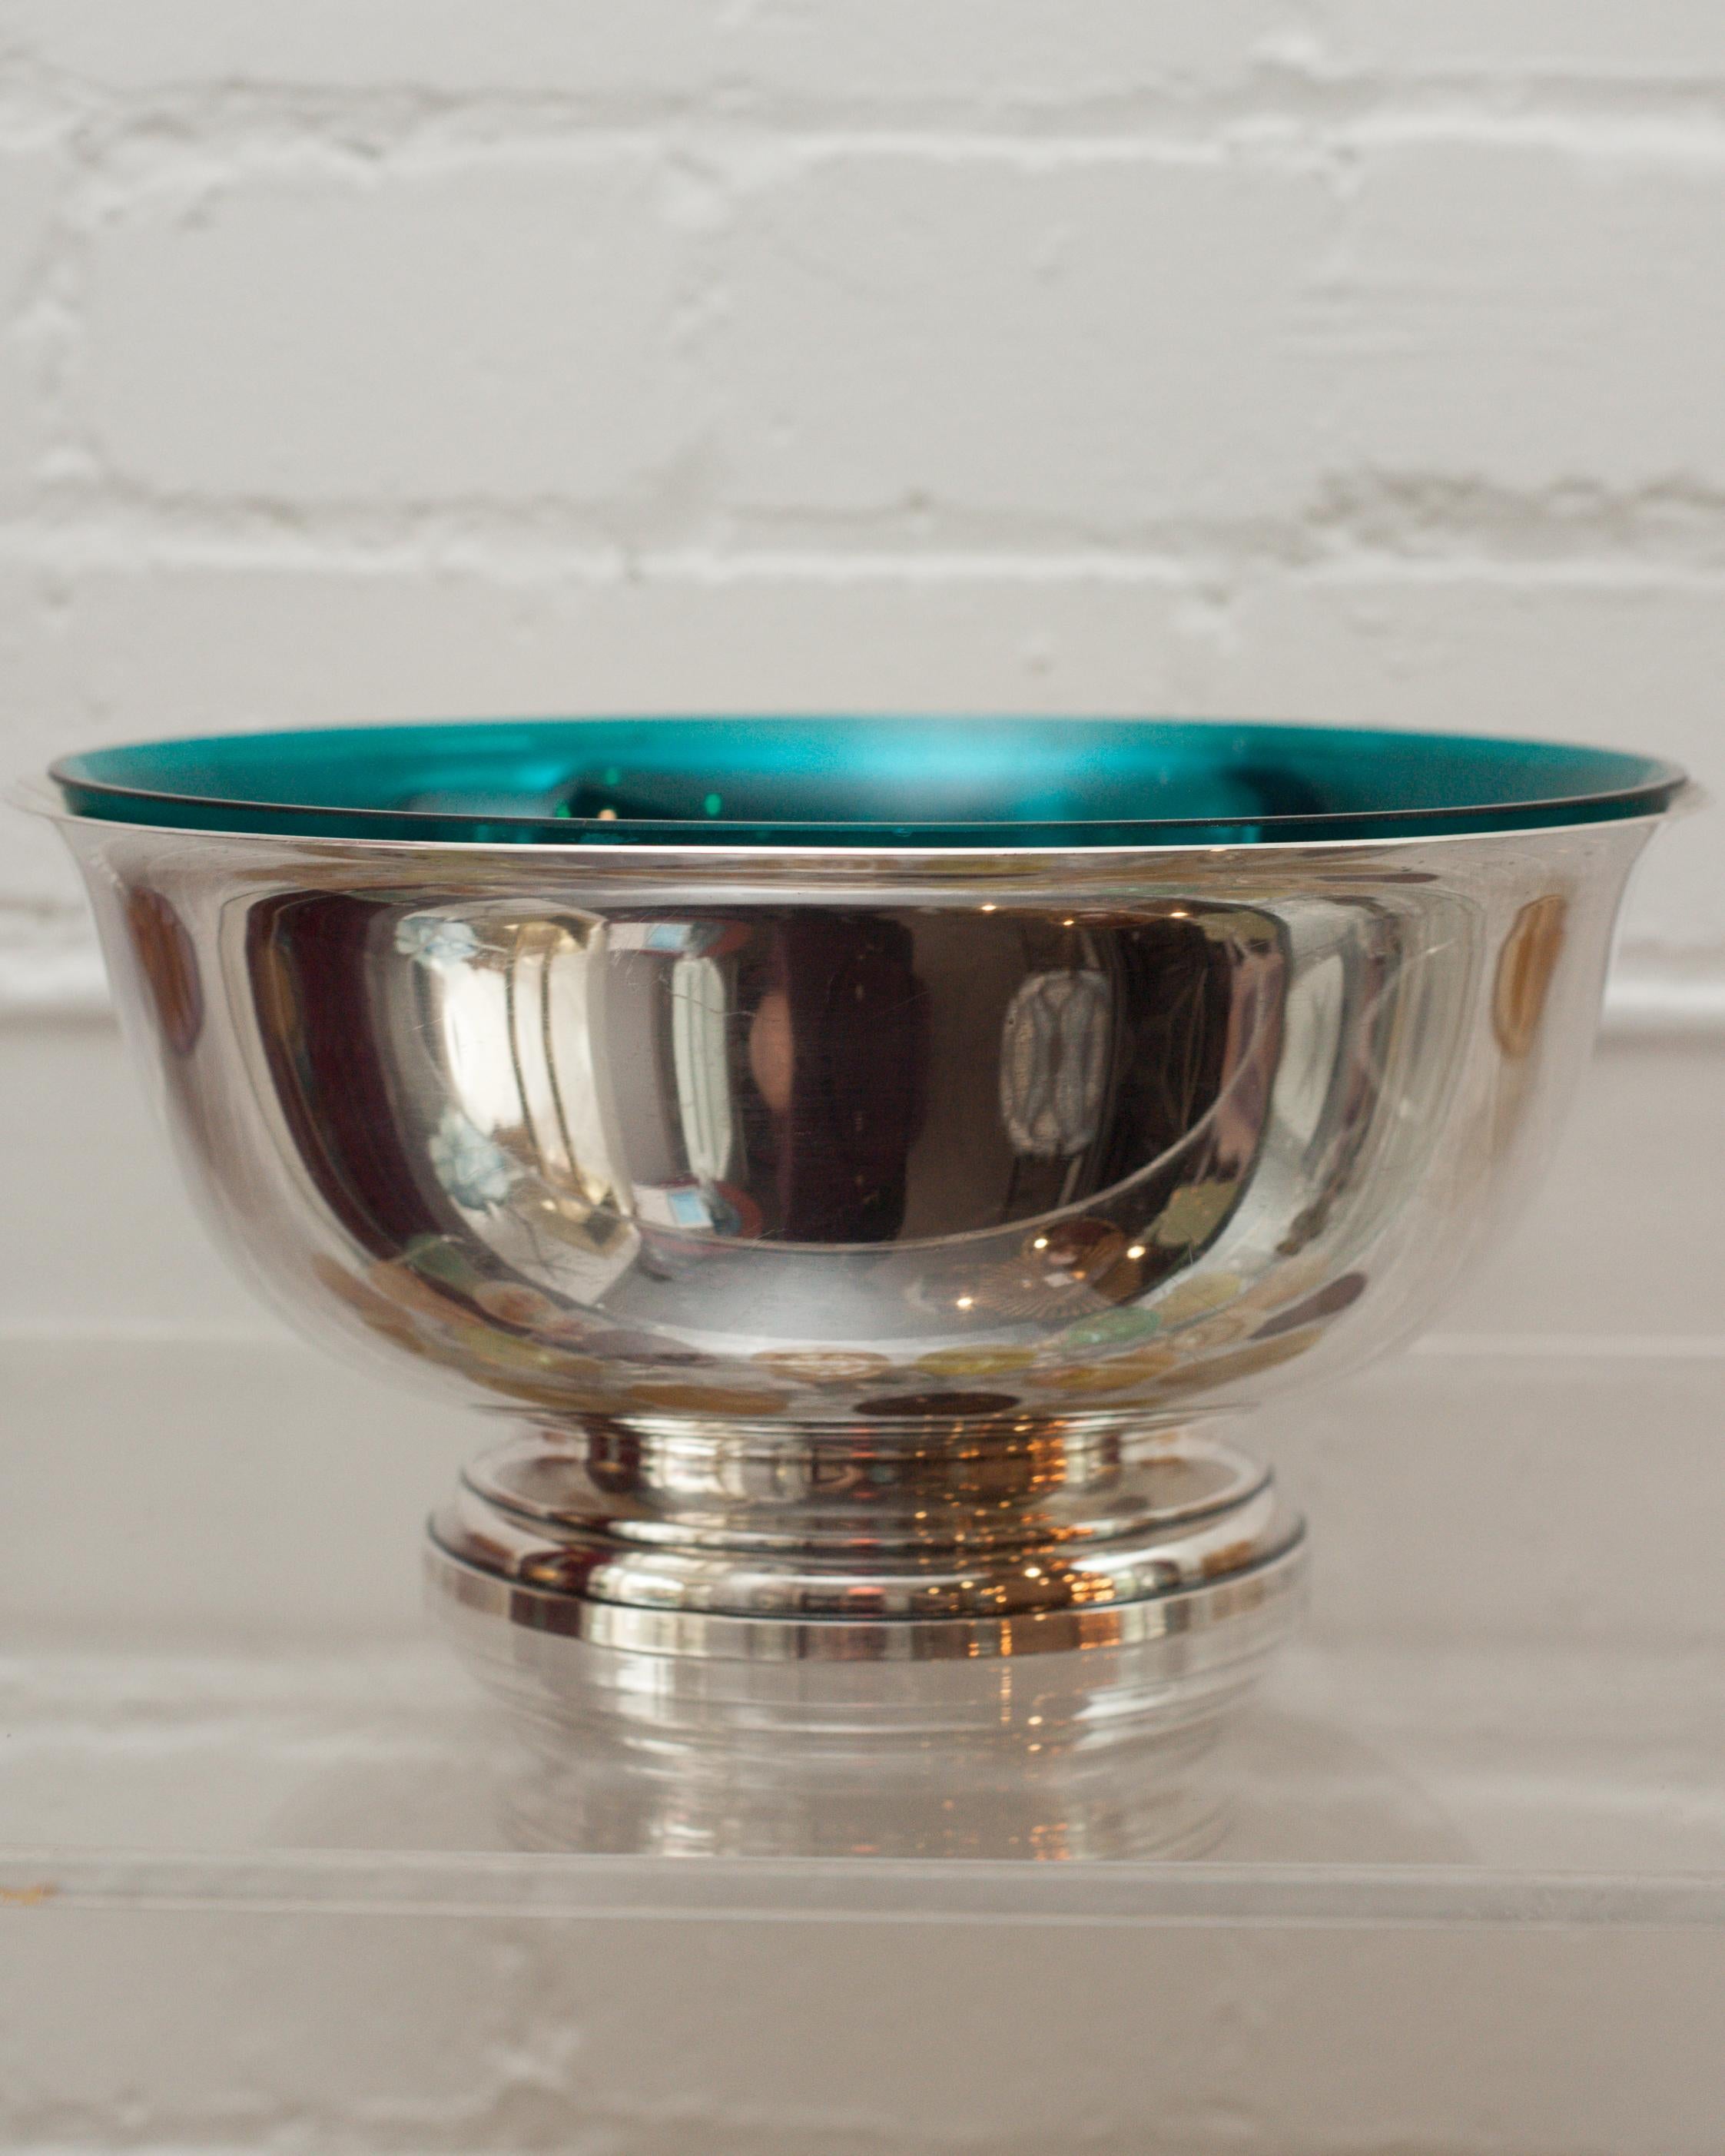 A beautiful midcentury sterling silver bowl with vivid blue glass liner. This Revere style bowl is perfect for fruits, candies, nuts. Due to the vibrant interior liner, this vessel is a beautiful empty as filled, and is easy to maintain when in use